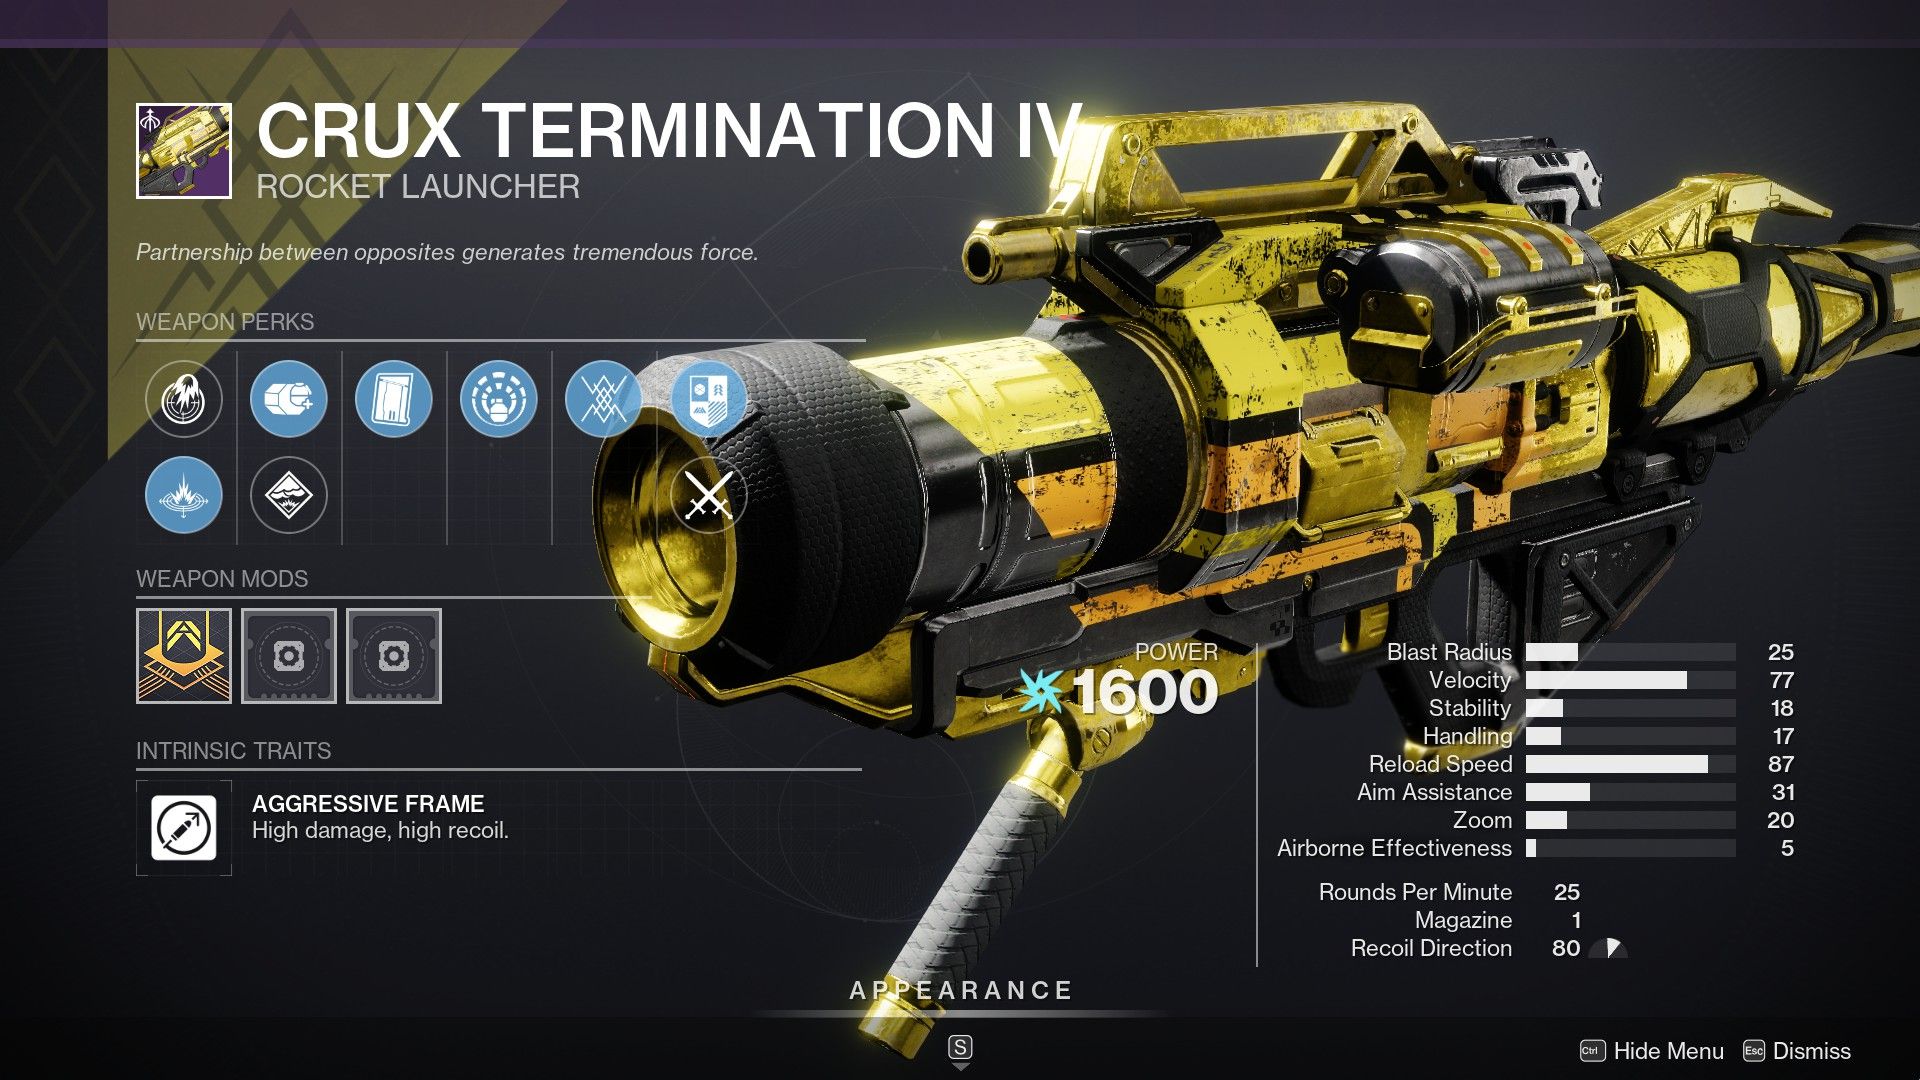 The curated roll for the Crux Termination IV in Destiny 2